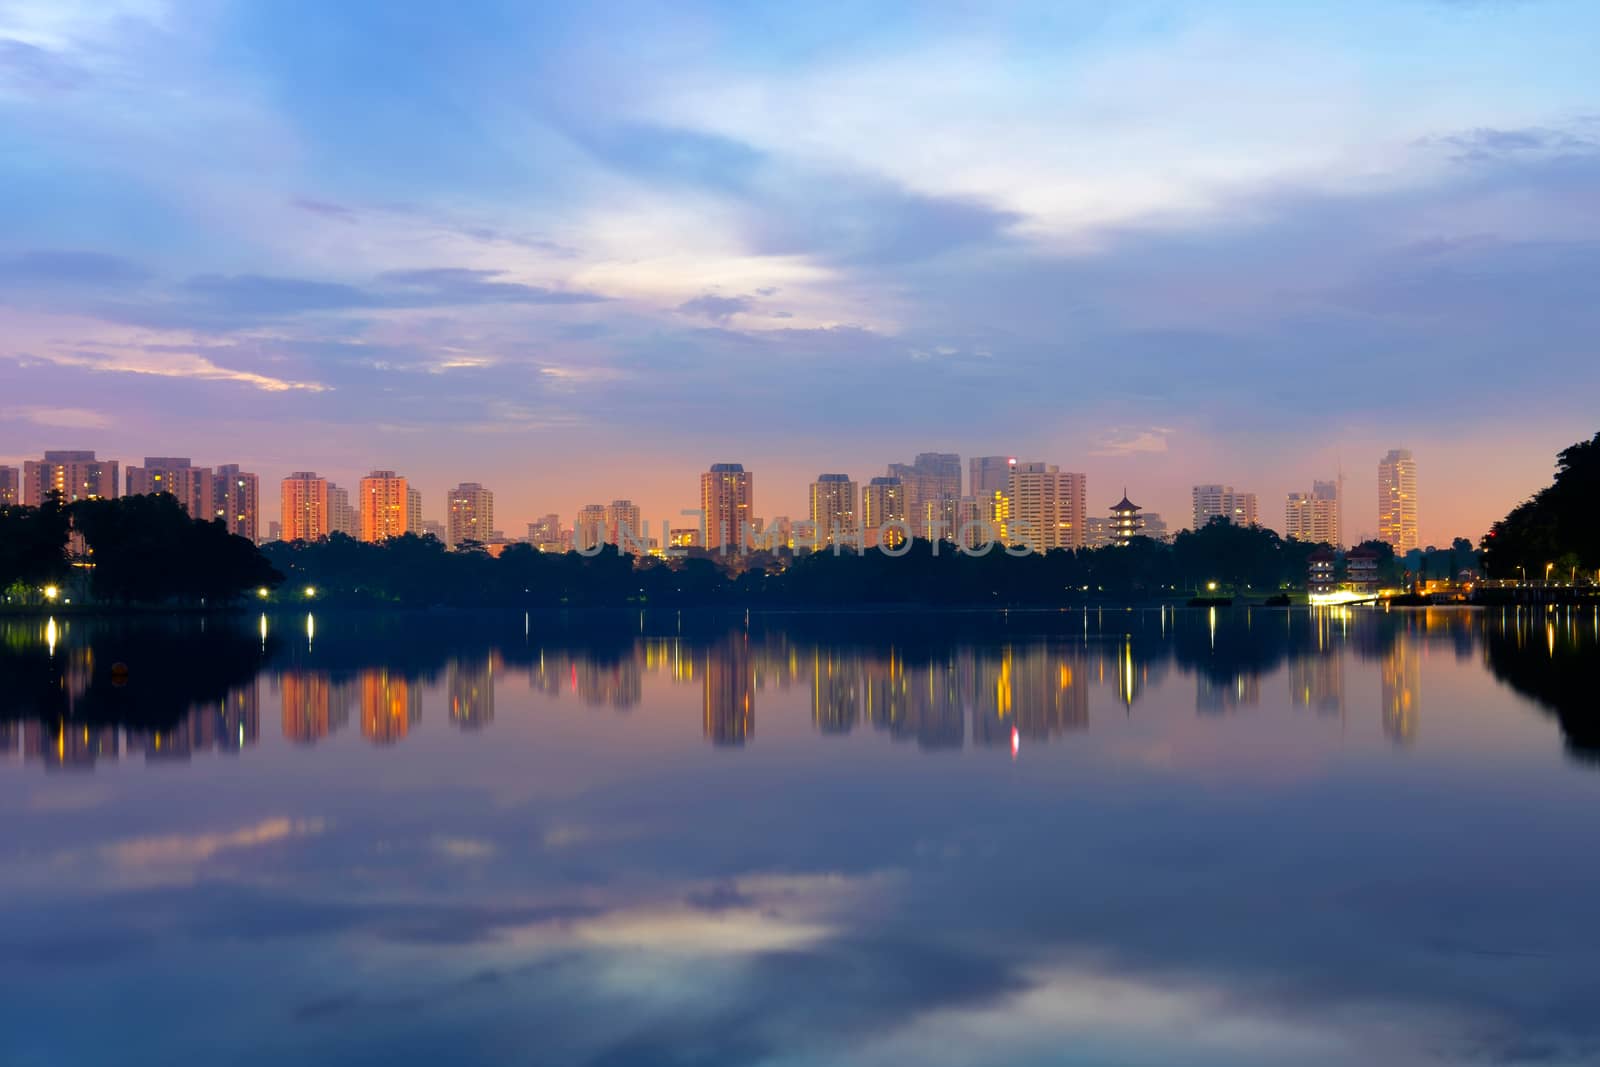 Reflection of building in the lake at sunrise at lakeside. Singapore